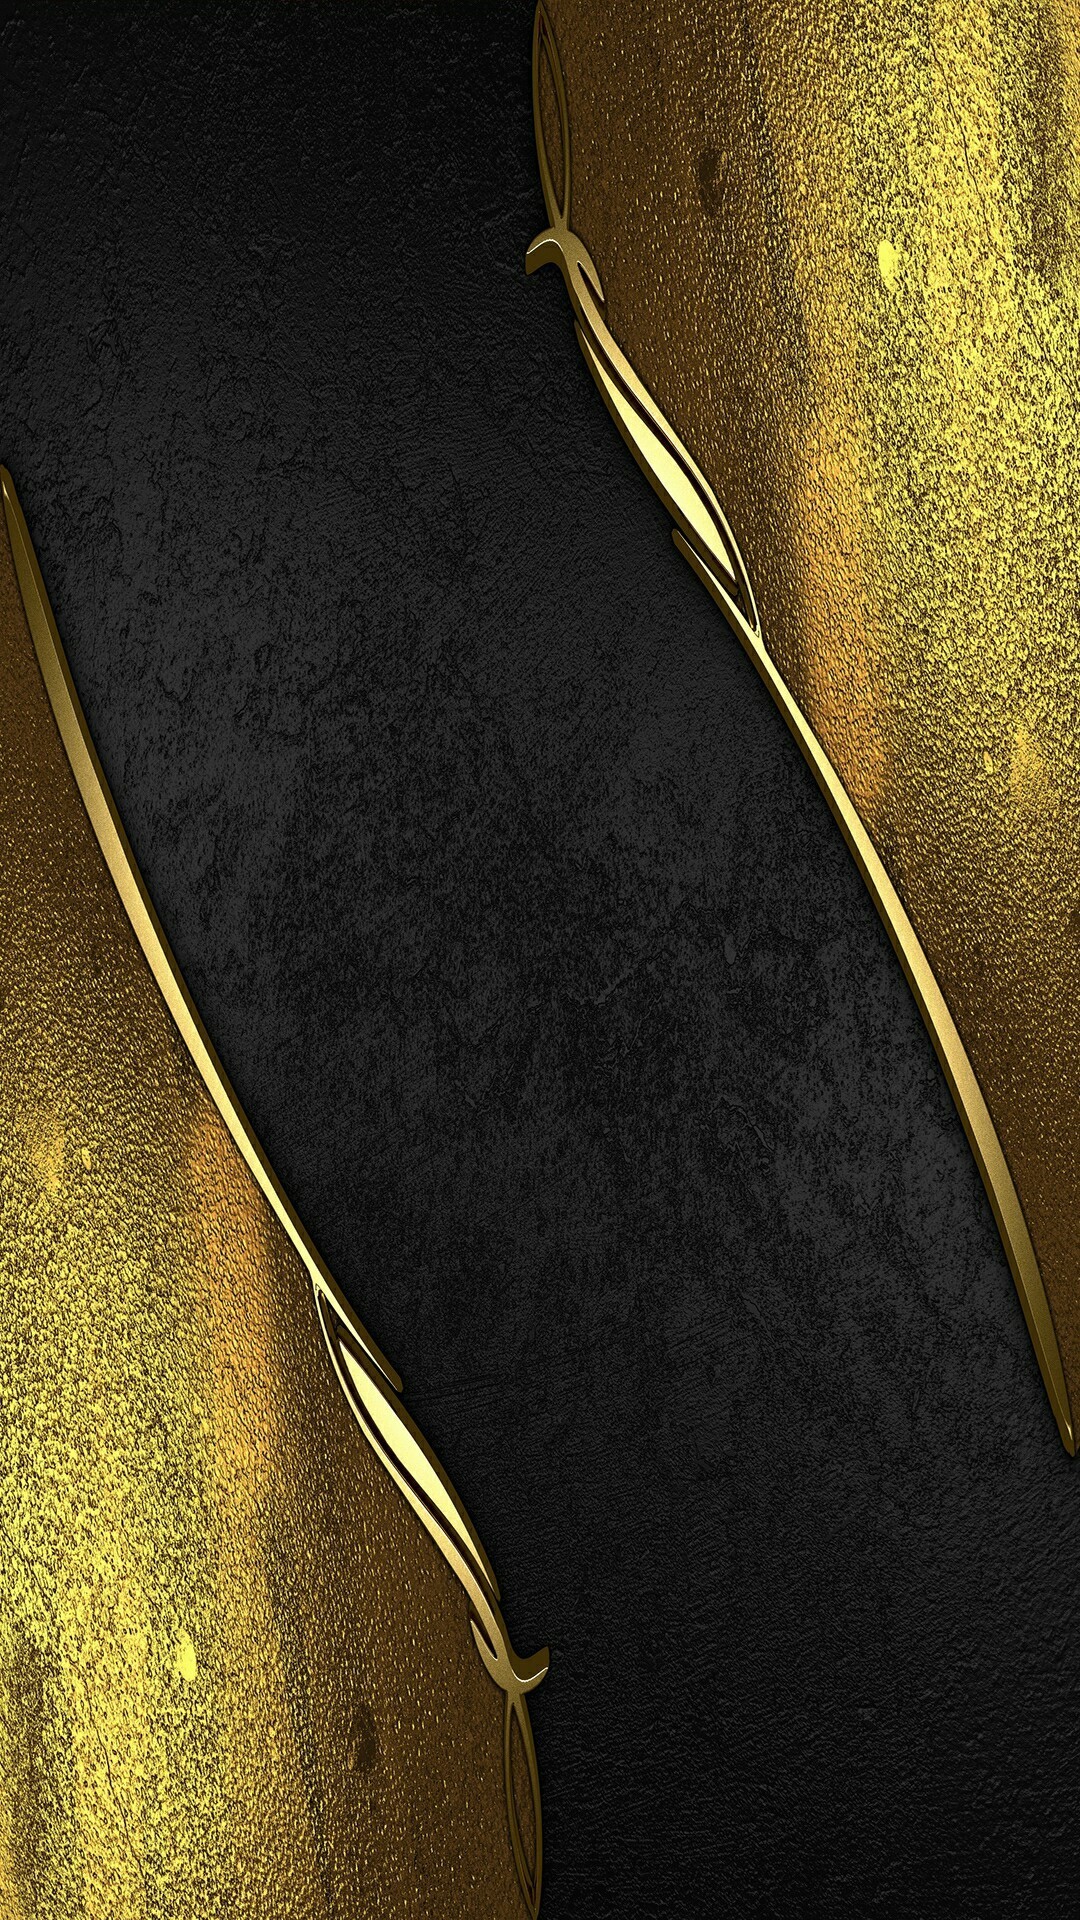 Phone Backgrounds, Phone Wallpapers, Gold Wallpaper, - Black Gold Wallpaper Phone - HD Wallpaper 